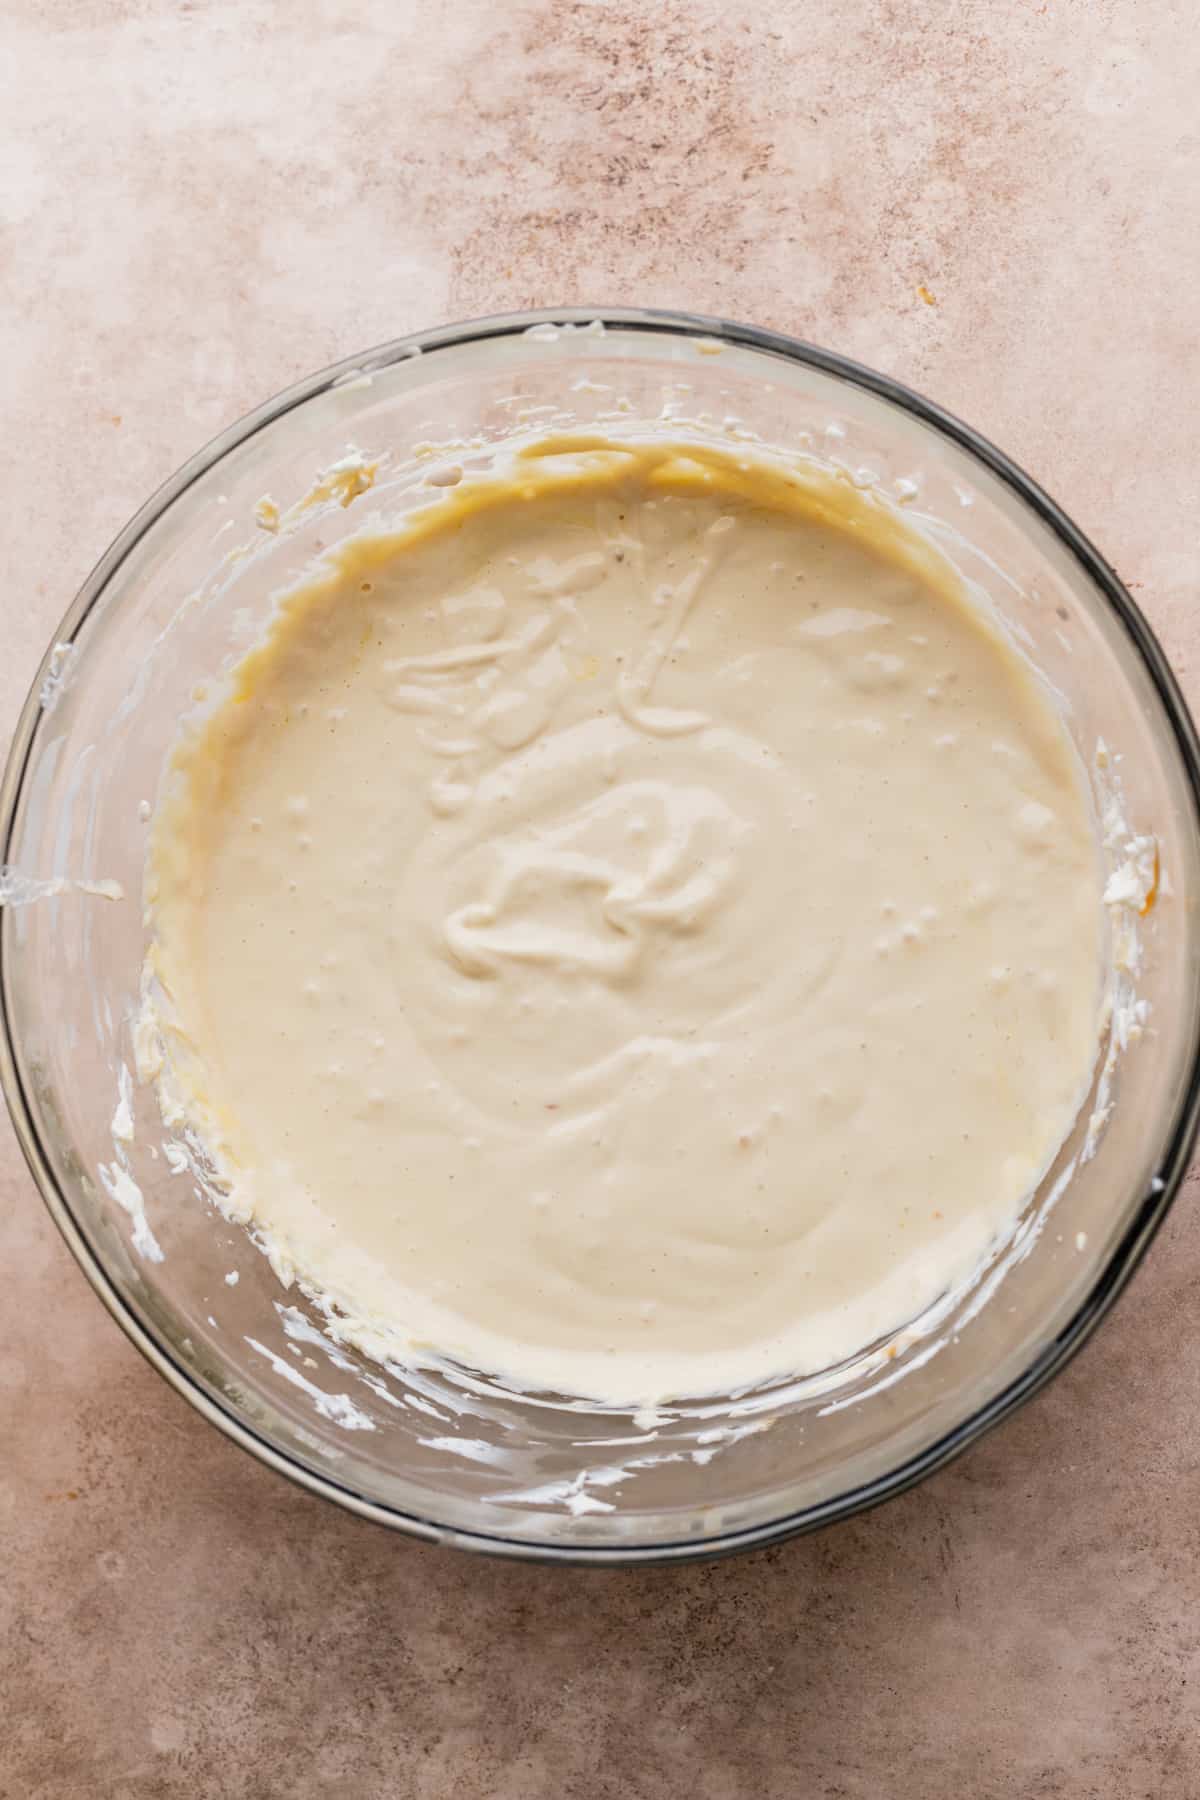 Cheesecake batter in a glass bowl.